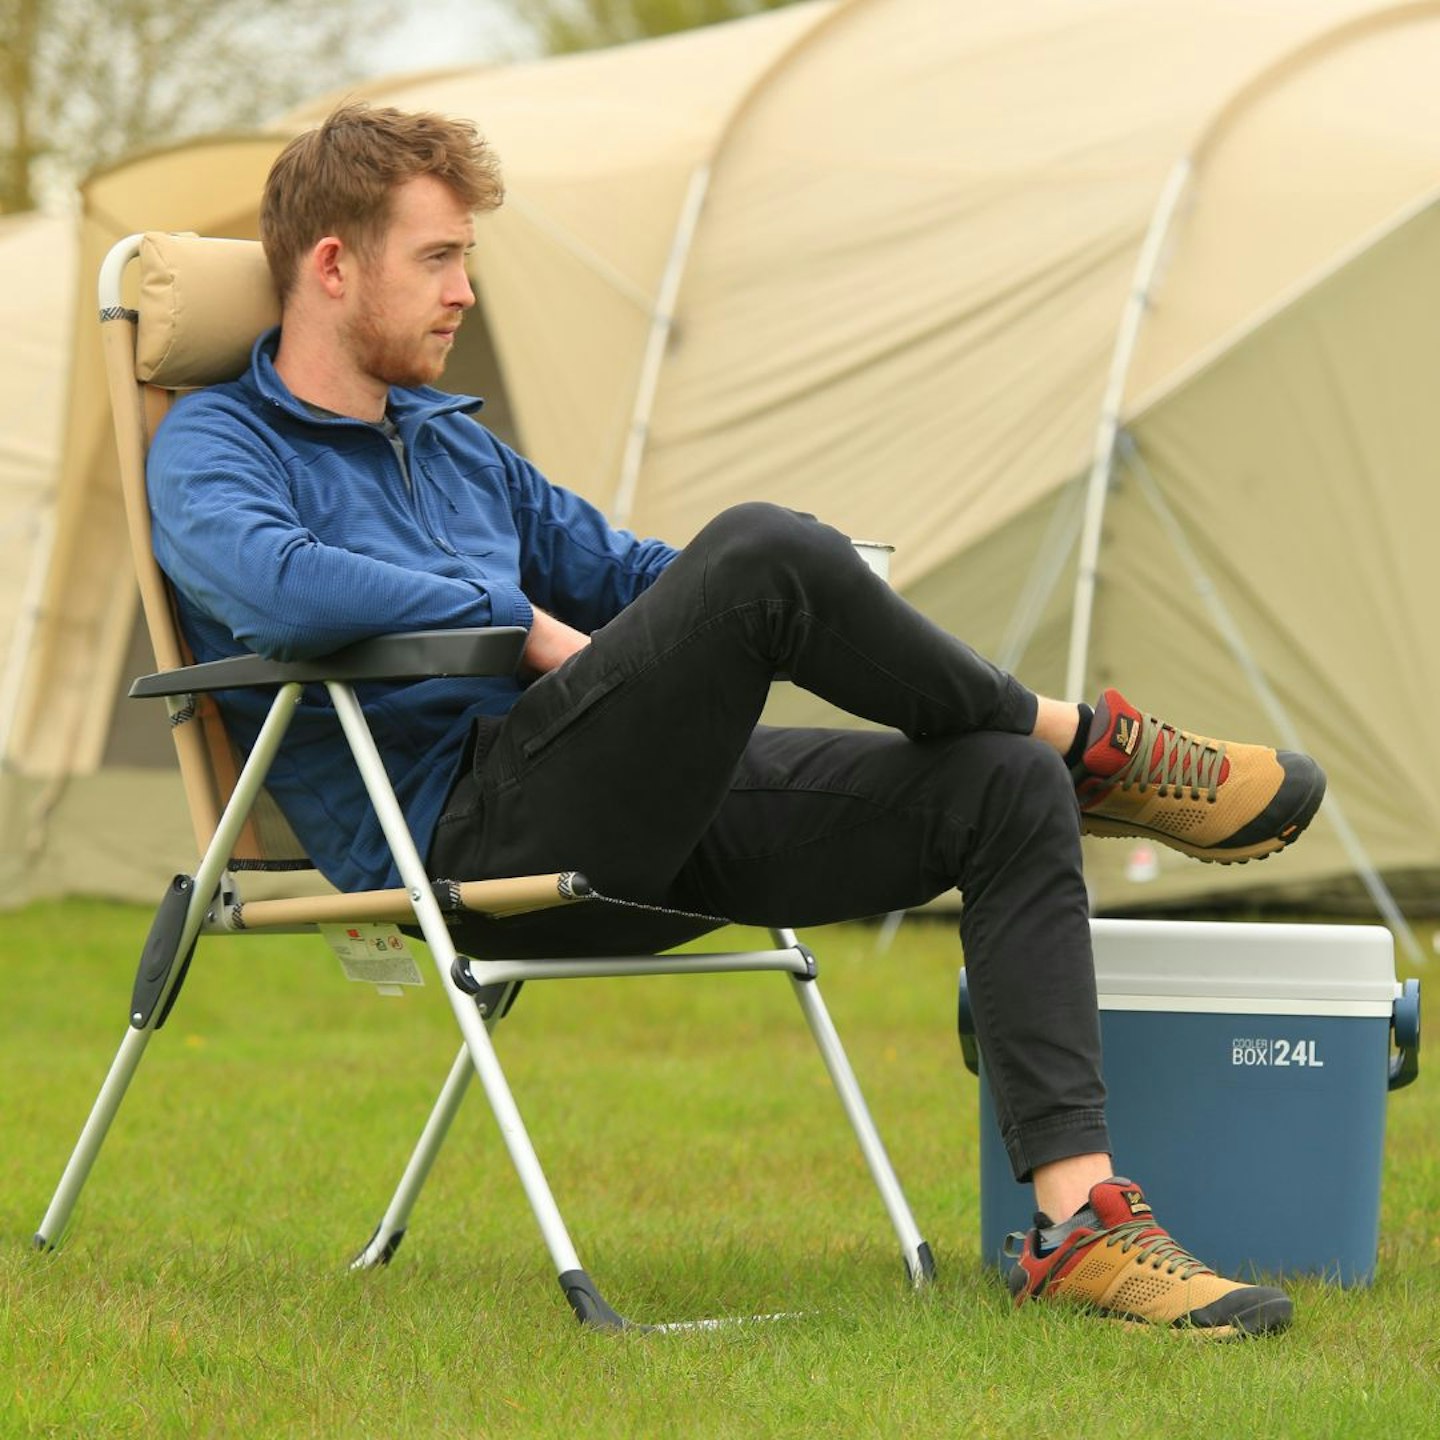 Camper sitting in a QUECHUA Camping Comfortable Reclining Folding Armchair